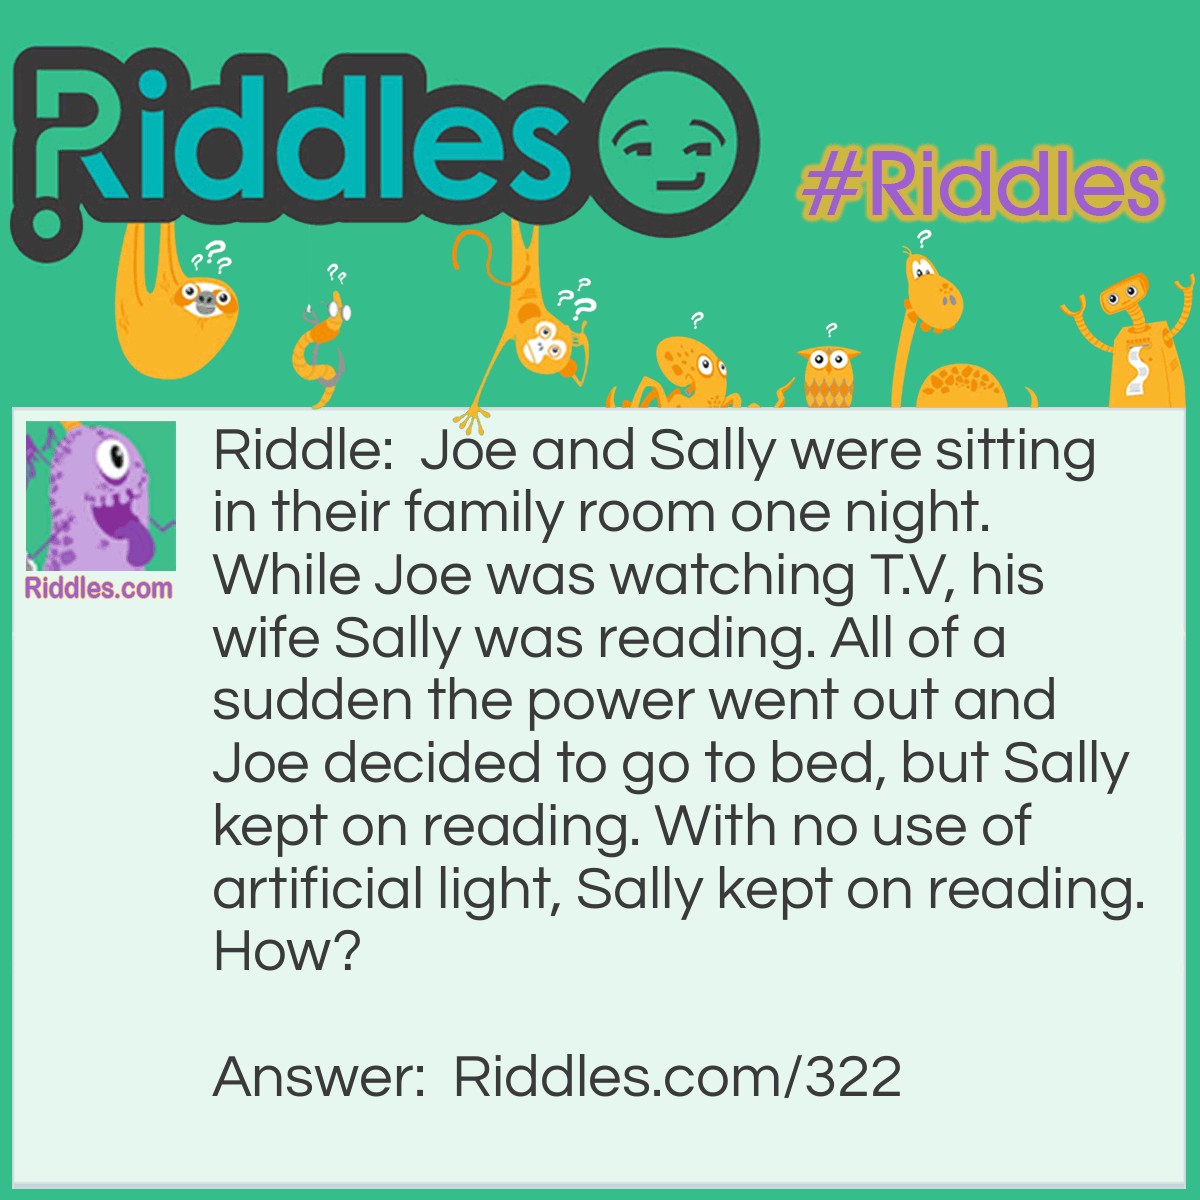 Riddle: Joe and Sally were sitting in their family room one night. While Joe was watching T.V, his wife Sally was reading. All of a sudden the power went out and Joe decided to go to bed, but Sally kept on reading. With no use of artificial light, Sally kept on reading. How? Answer: Sally was blind, she was reading a book by Braille.